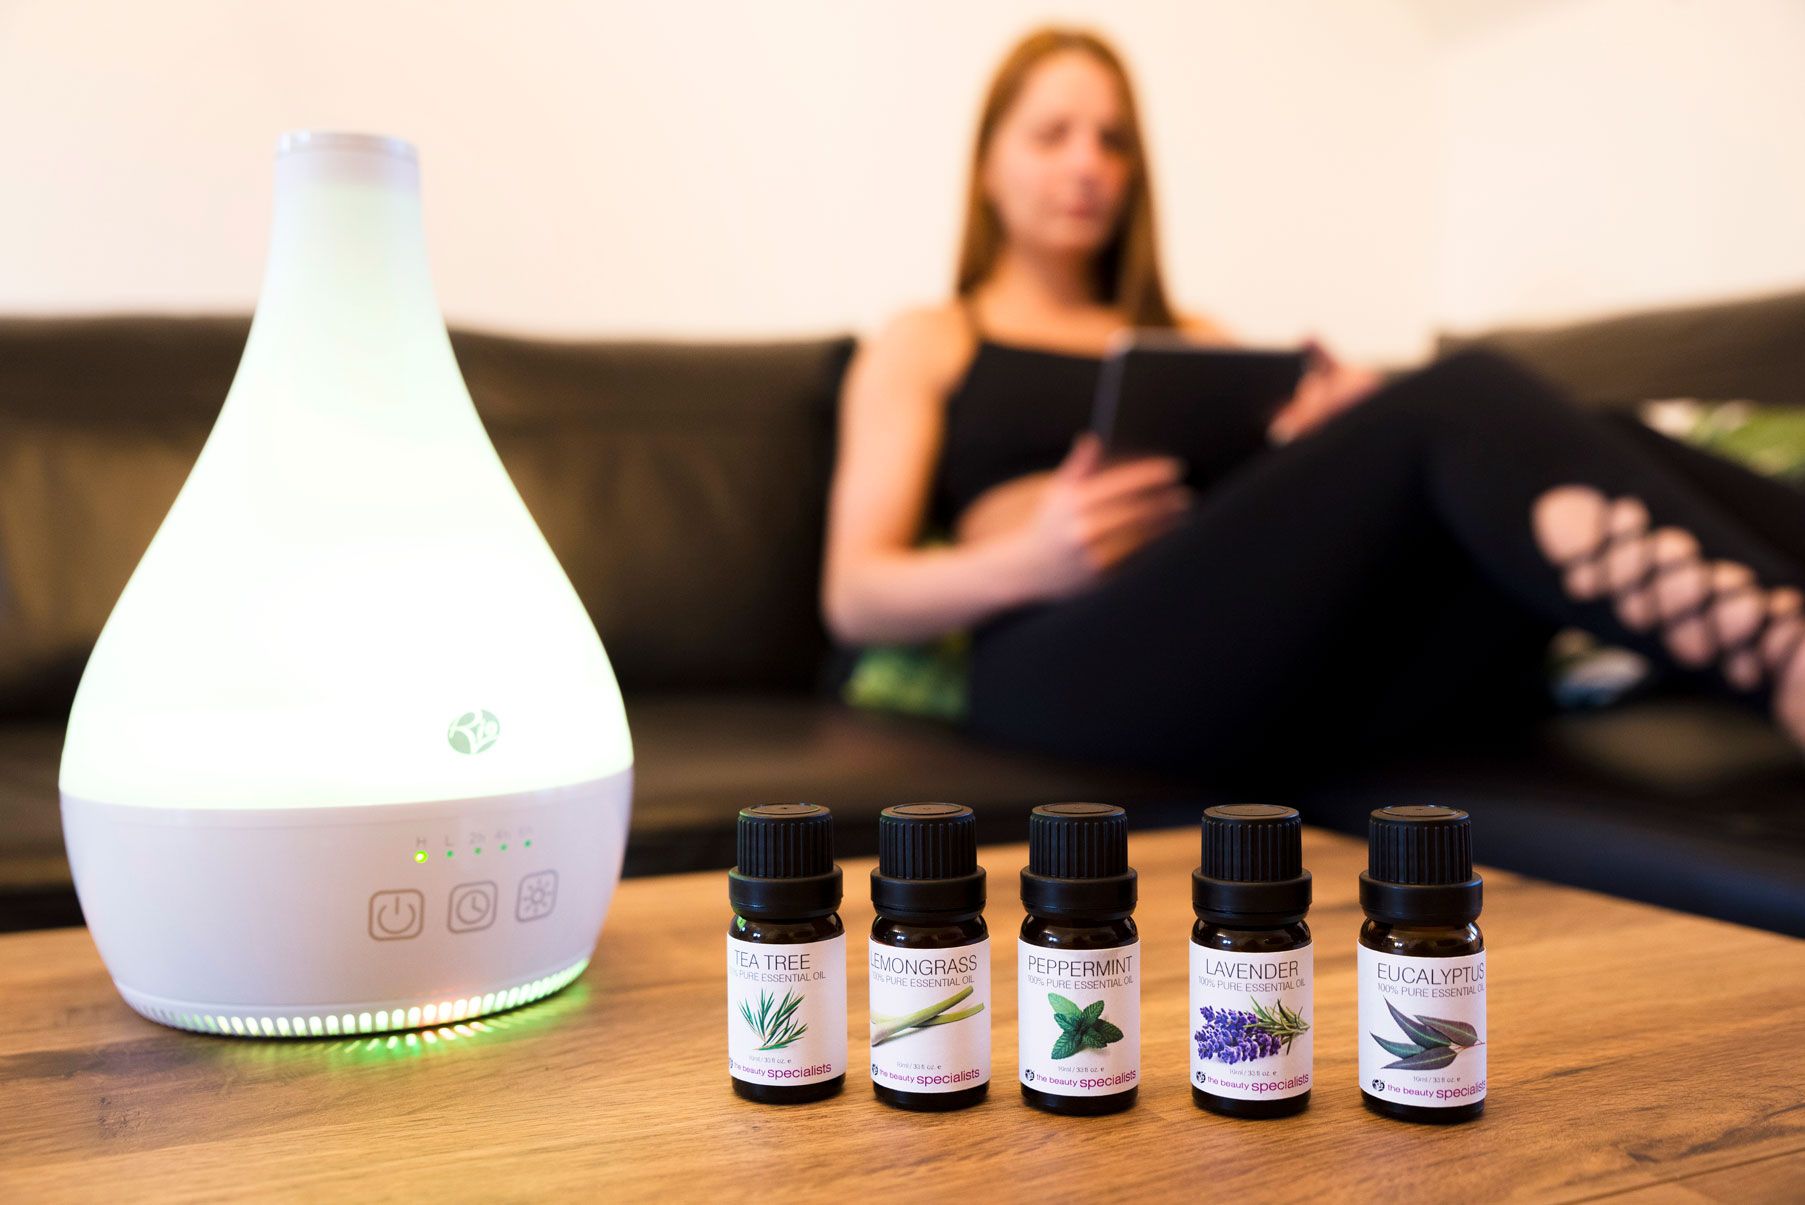 rio aromatherapy 100% essential oil collection placed on table next to diffuser in a home setting with lady relaxing on sofa in the background